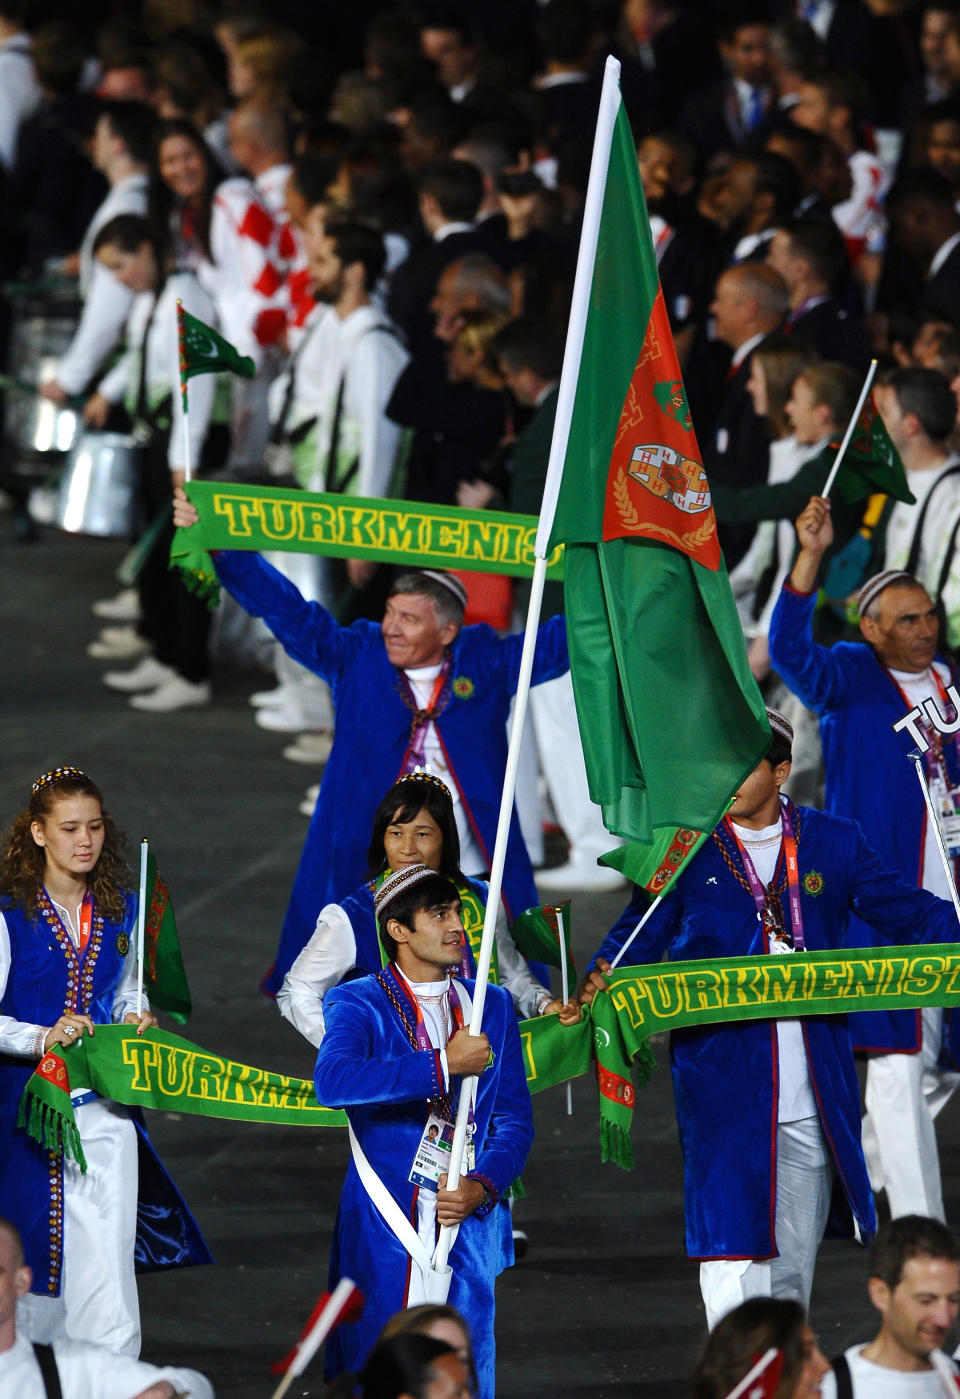 LONDON, ENGLAND - JULY 27: Serdar Hudayberdiyev of the Turkmenistan Olympic boxing team carries his country's flag during the Opening Ceremony of the London 2012 Olympic Games at the Olympic Stadium on July 27, 2012 in London, England. (Photo by Laurence Griffiths/Getty Images)